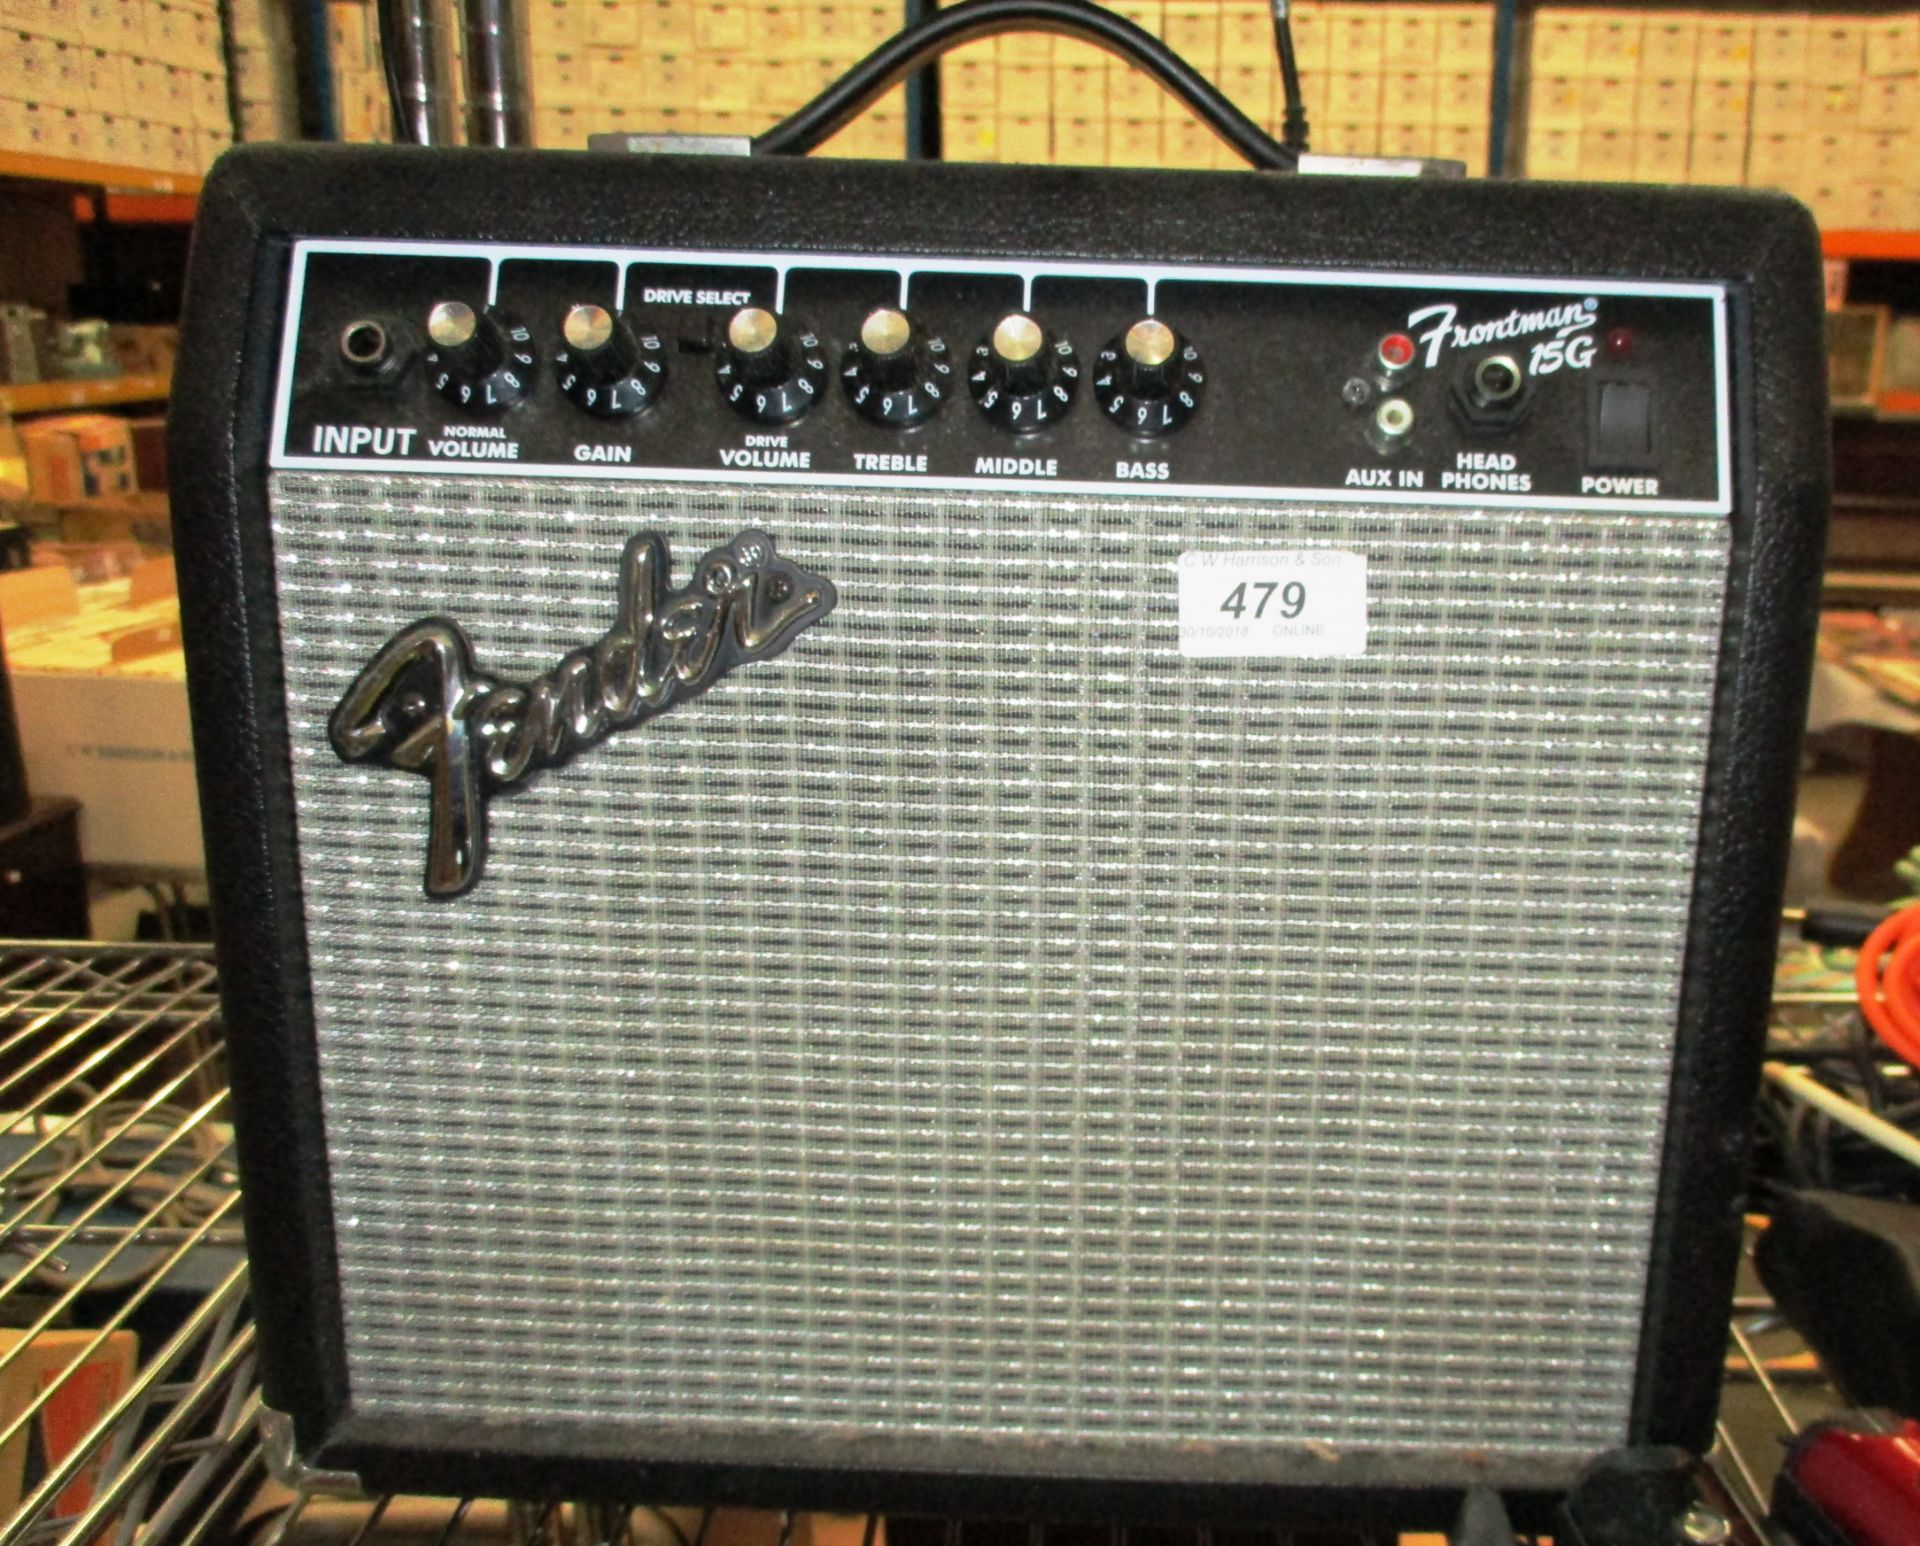 A Fender Frontman 156 amplifier complete with a quantity of jack plugs